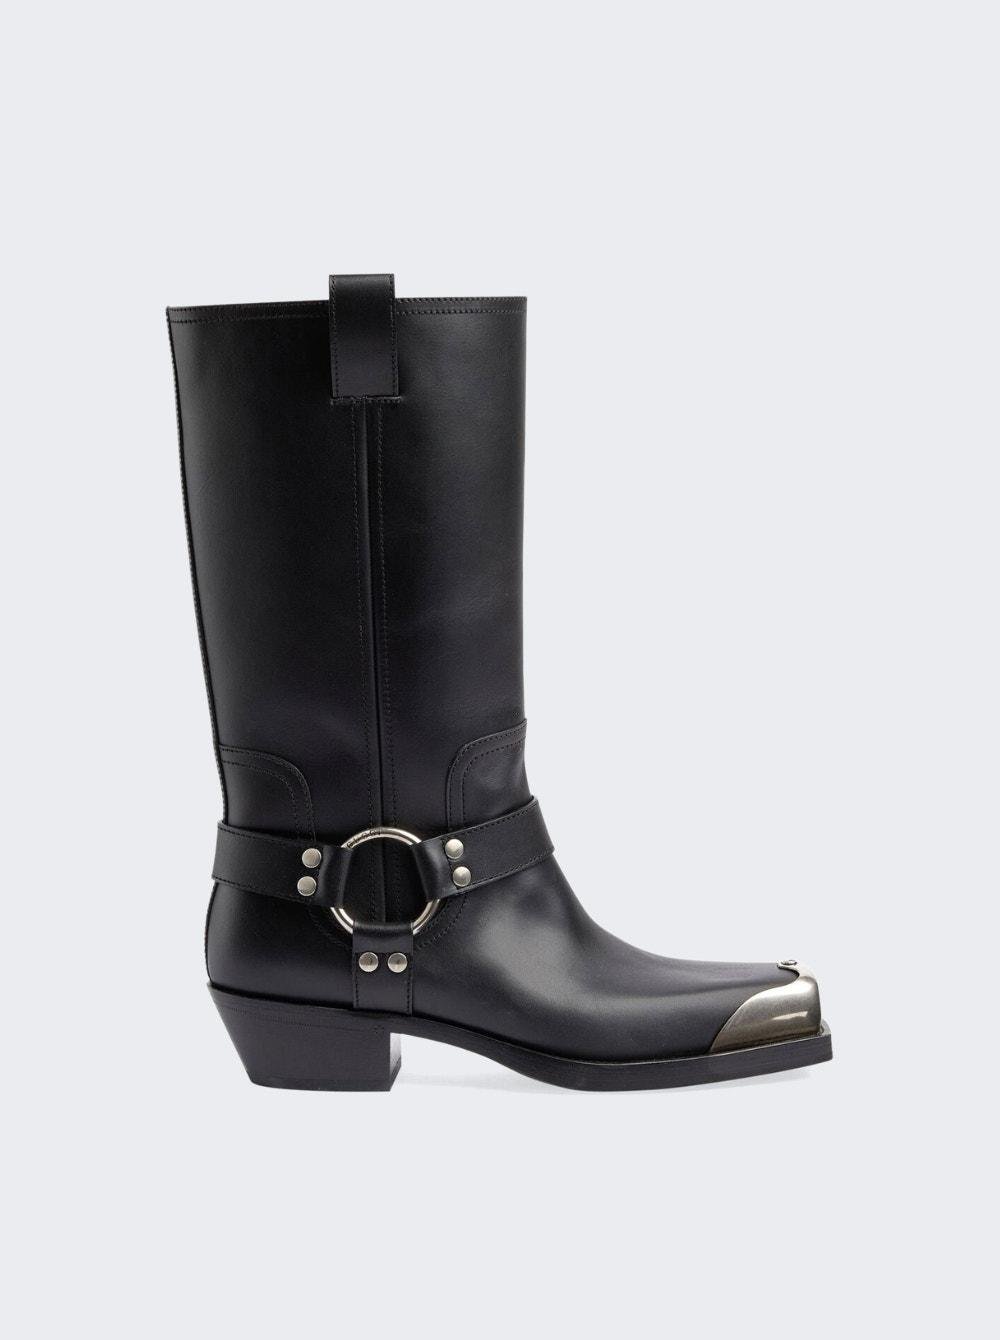 Harness Calf Tall Boots Black by GUCCI